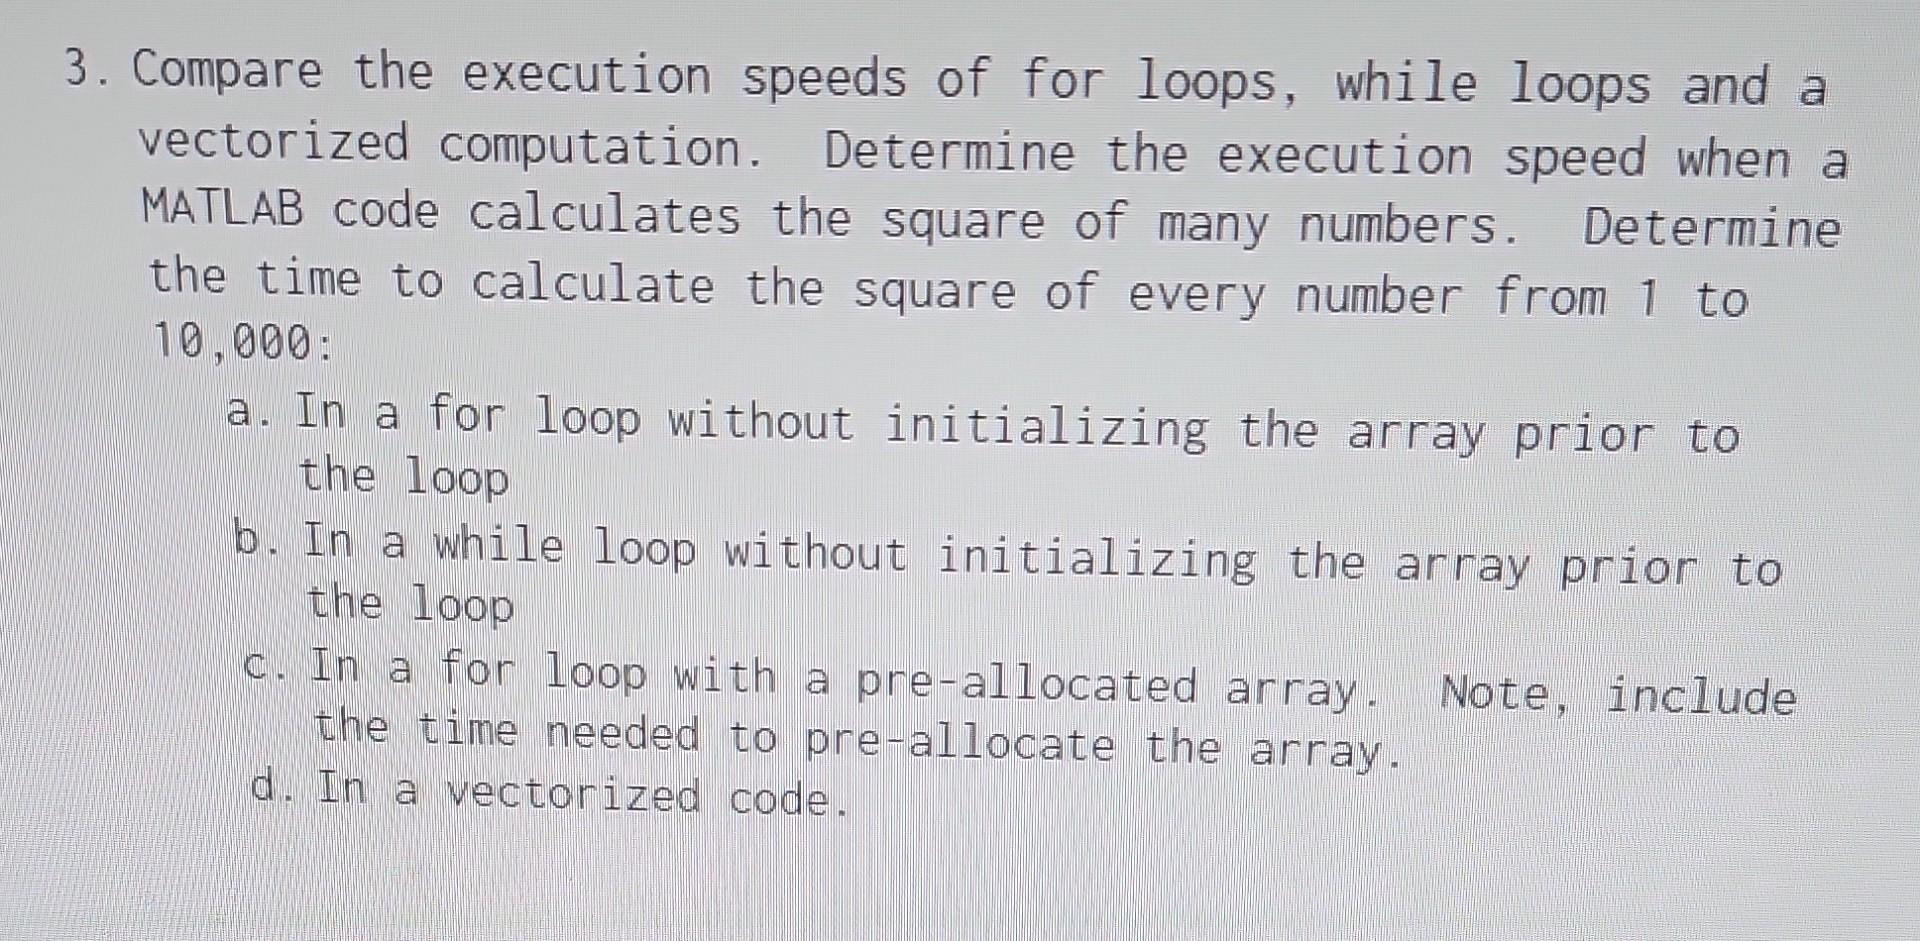 3. Compare the execution speeds of for loops, while loops and a vectorized computation. Determine the